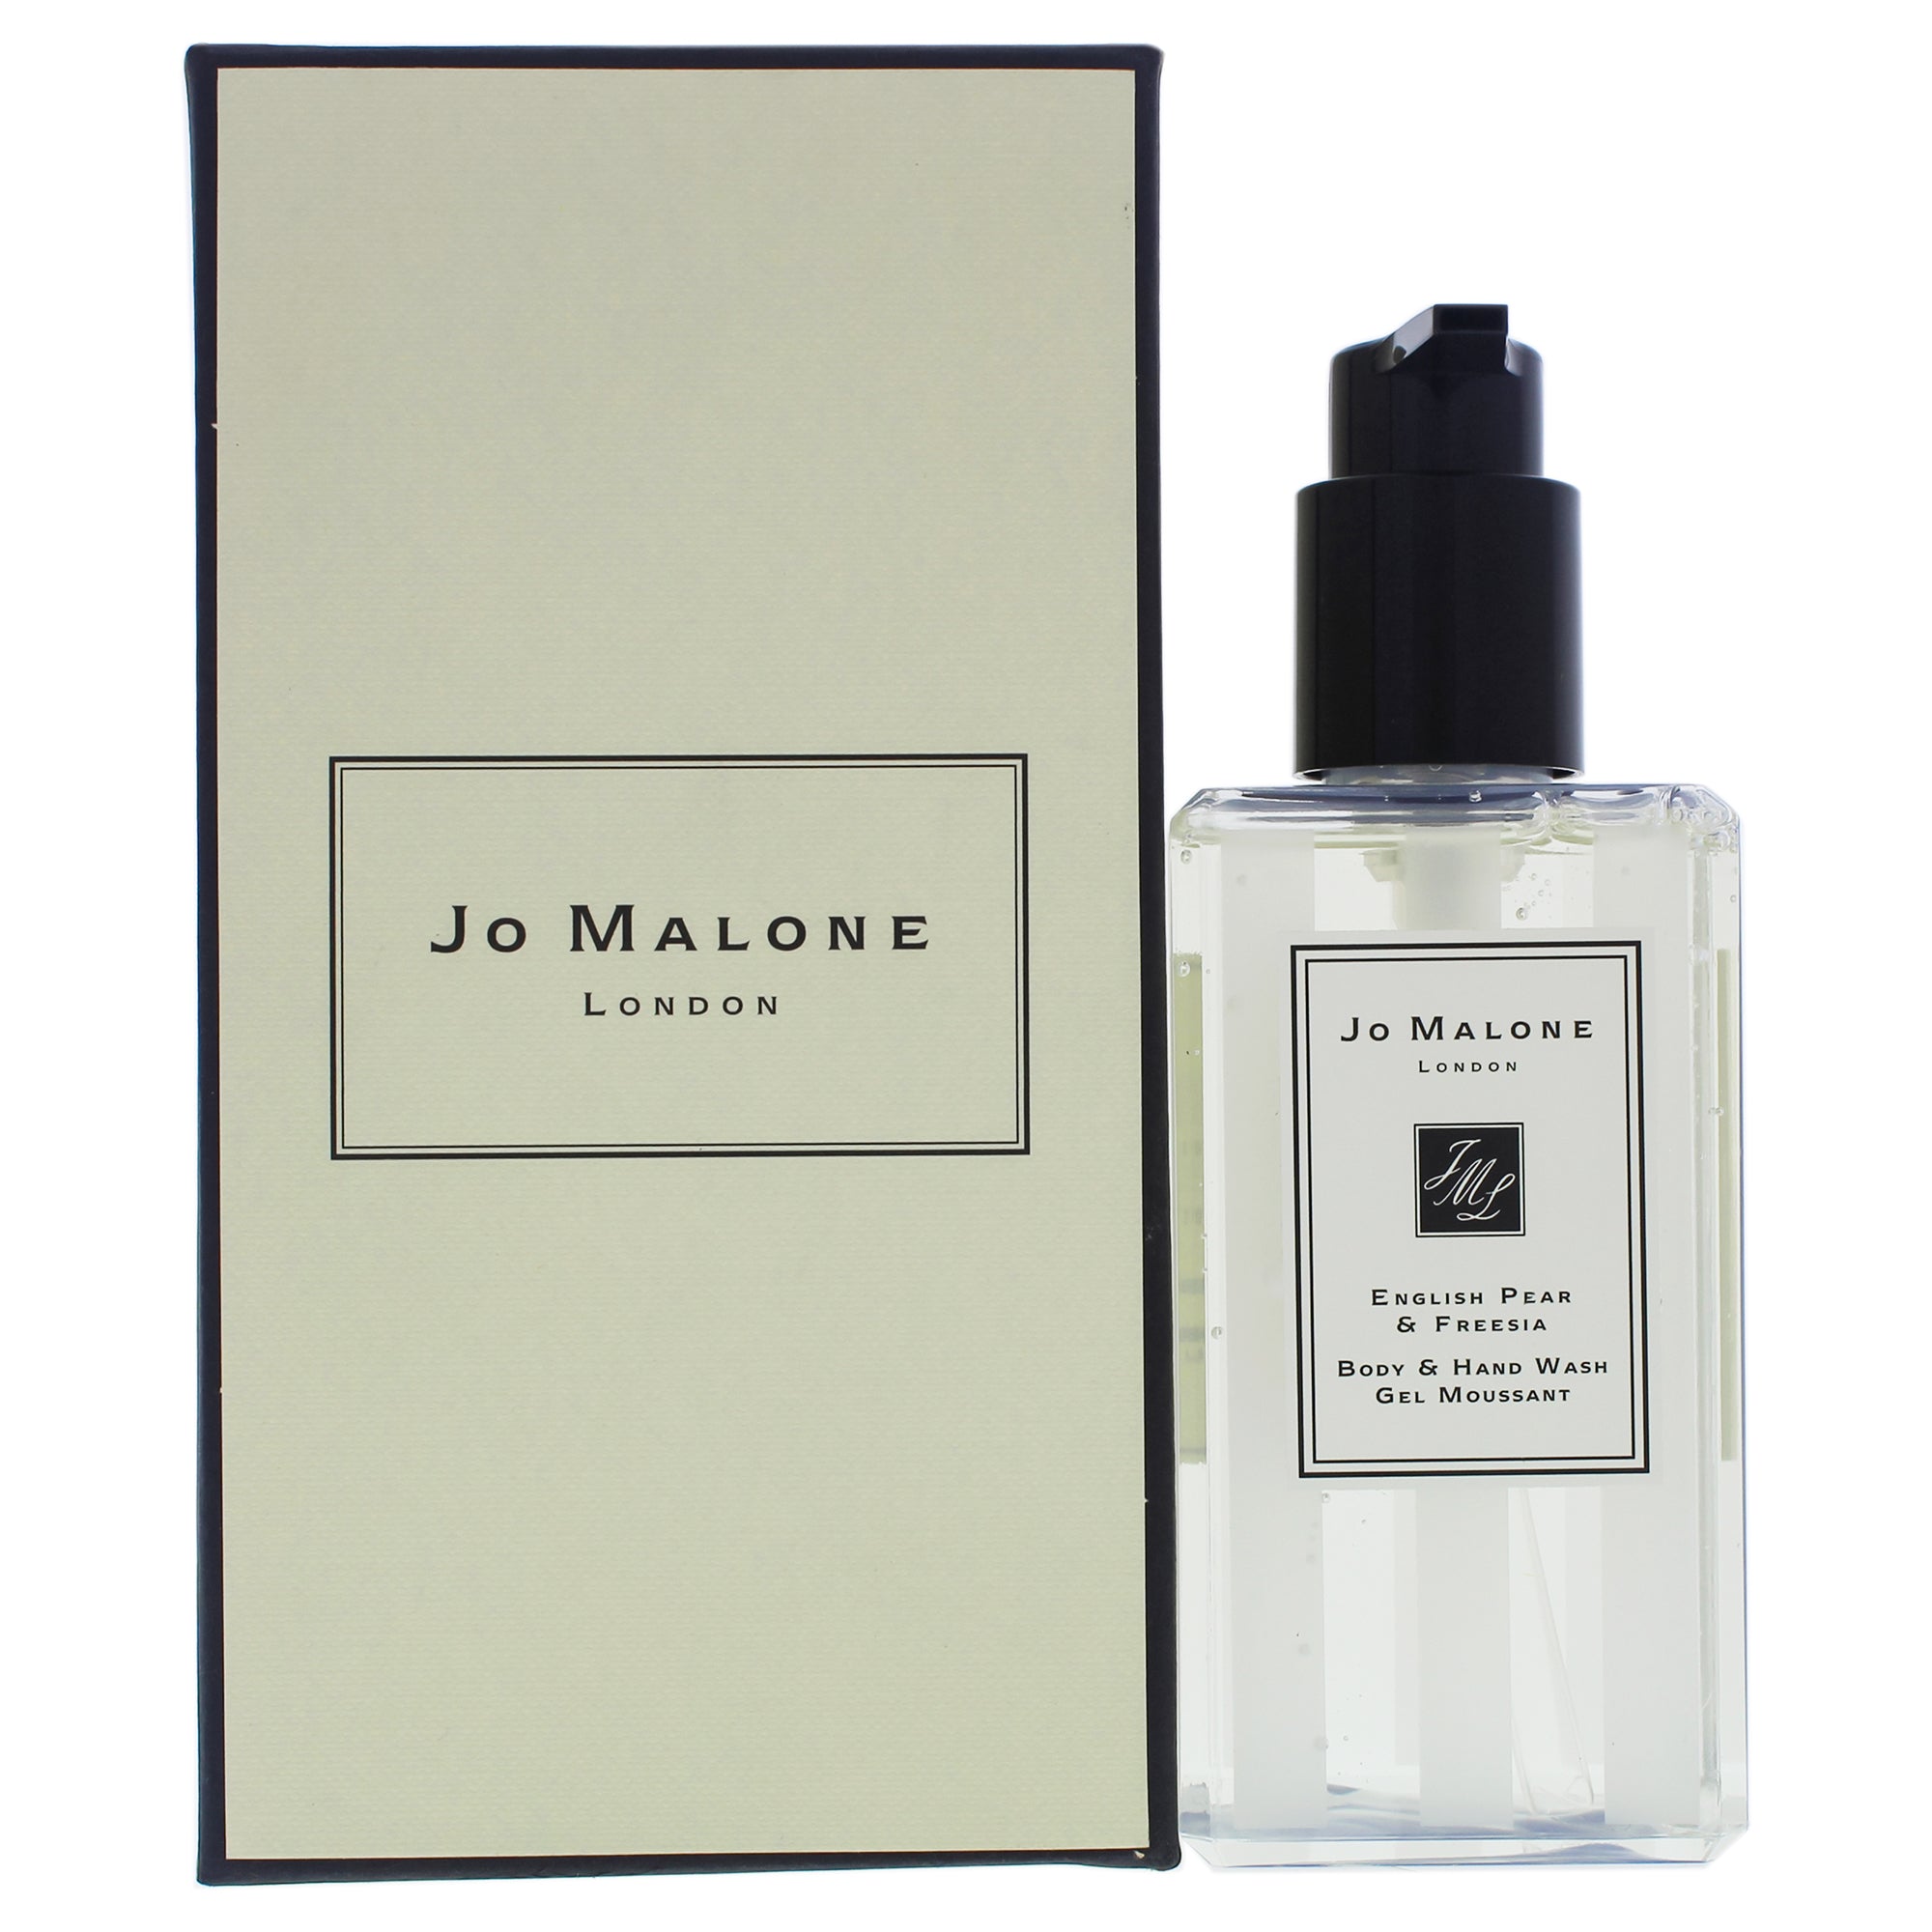 Jo Malone London English Pear And Freesia Hand And Body Wash By Jo Malone For Unisex - 8.4 oz Body Wash In White